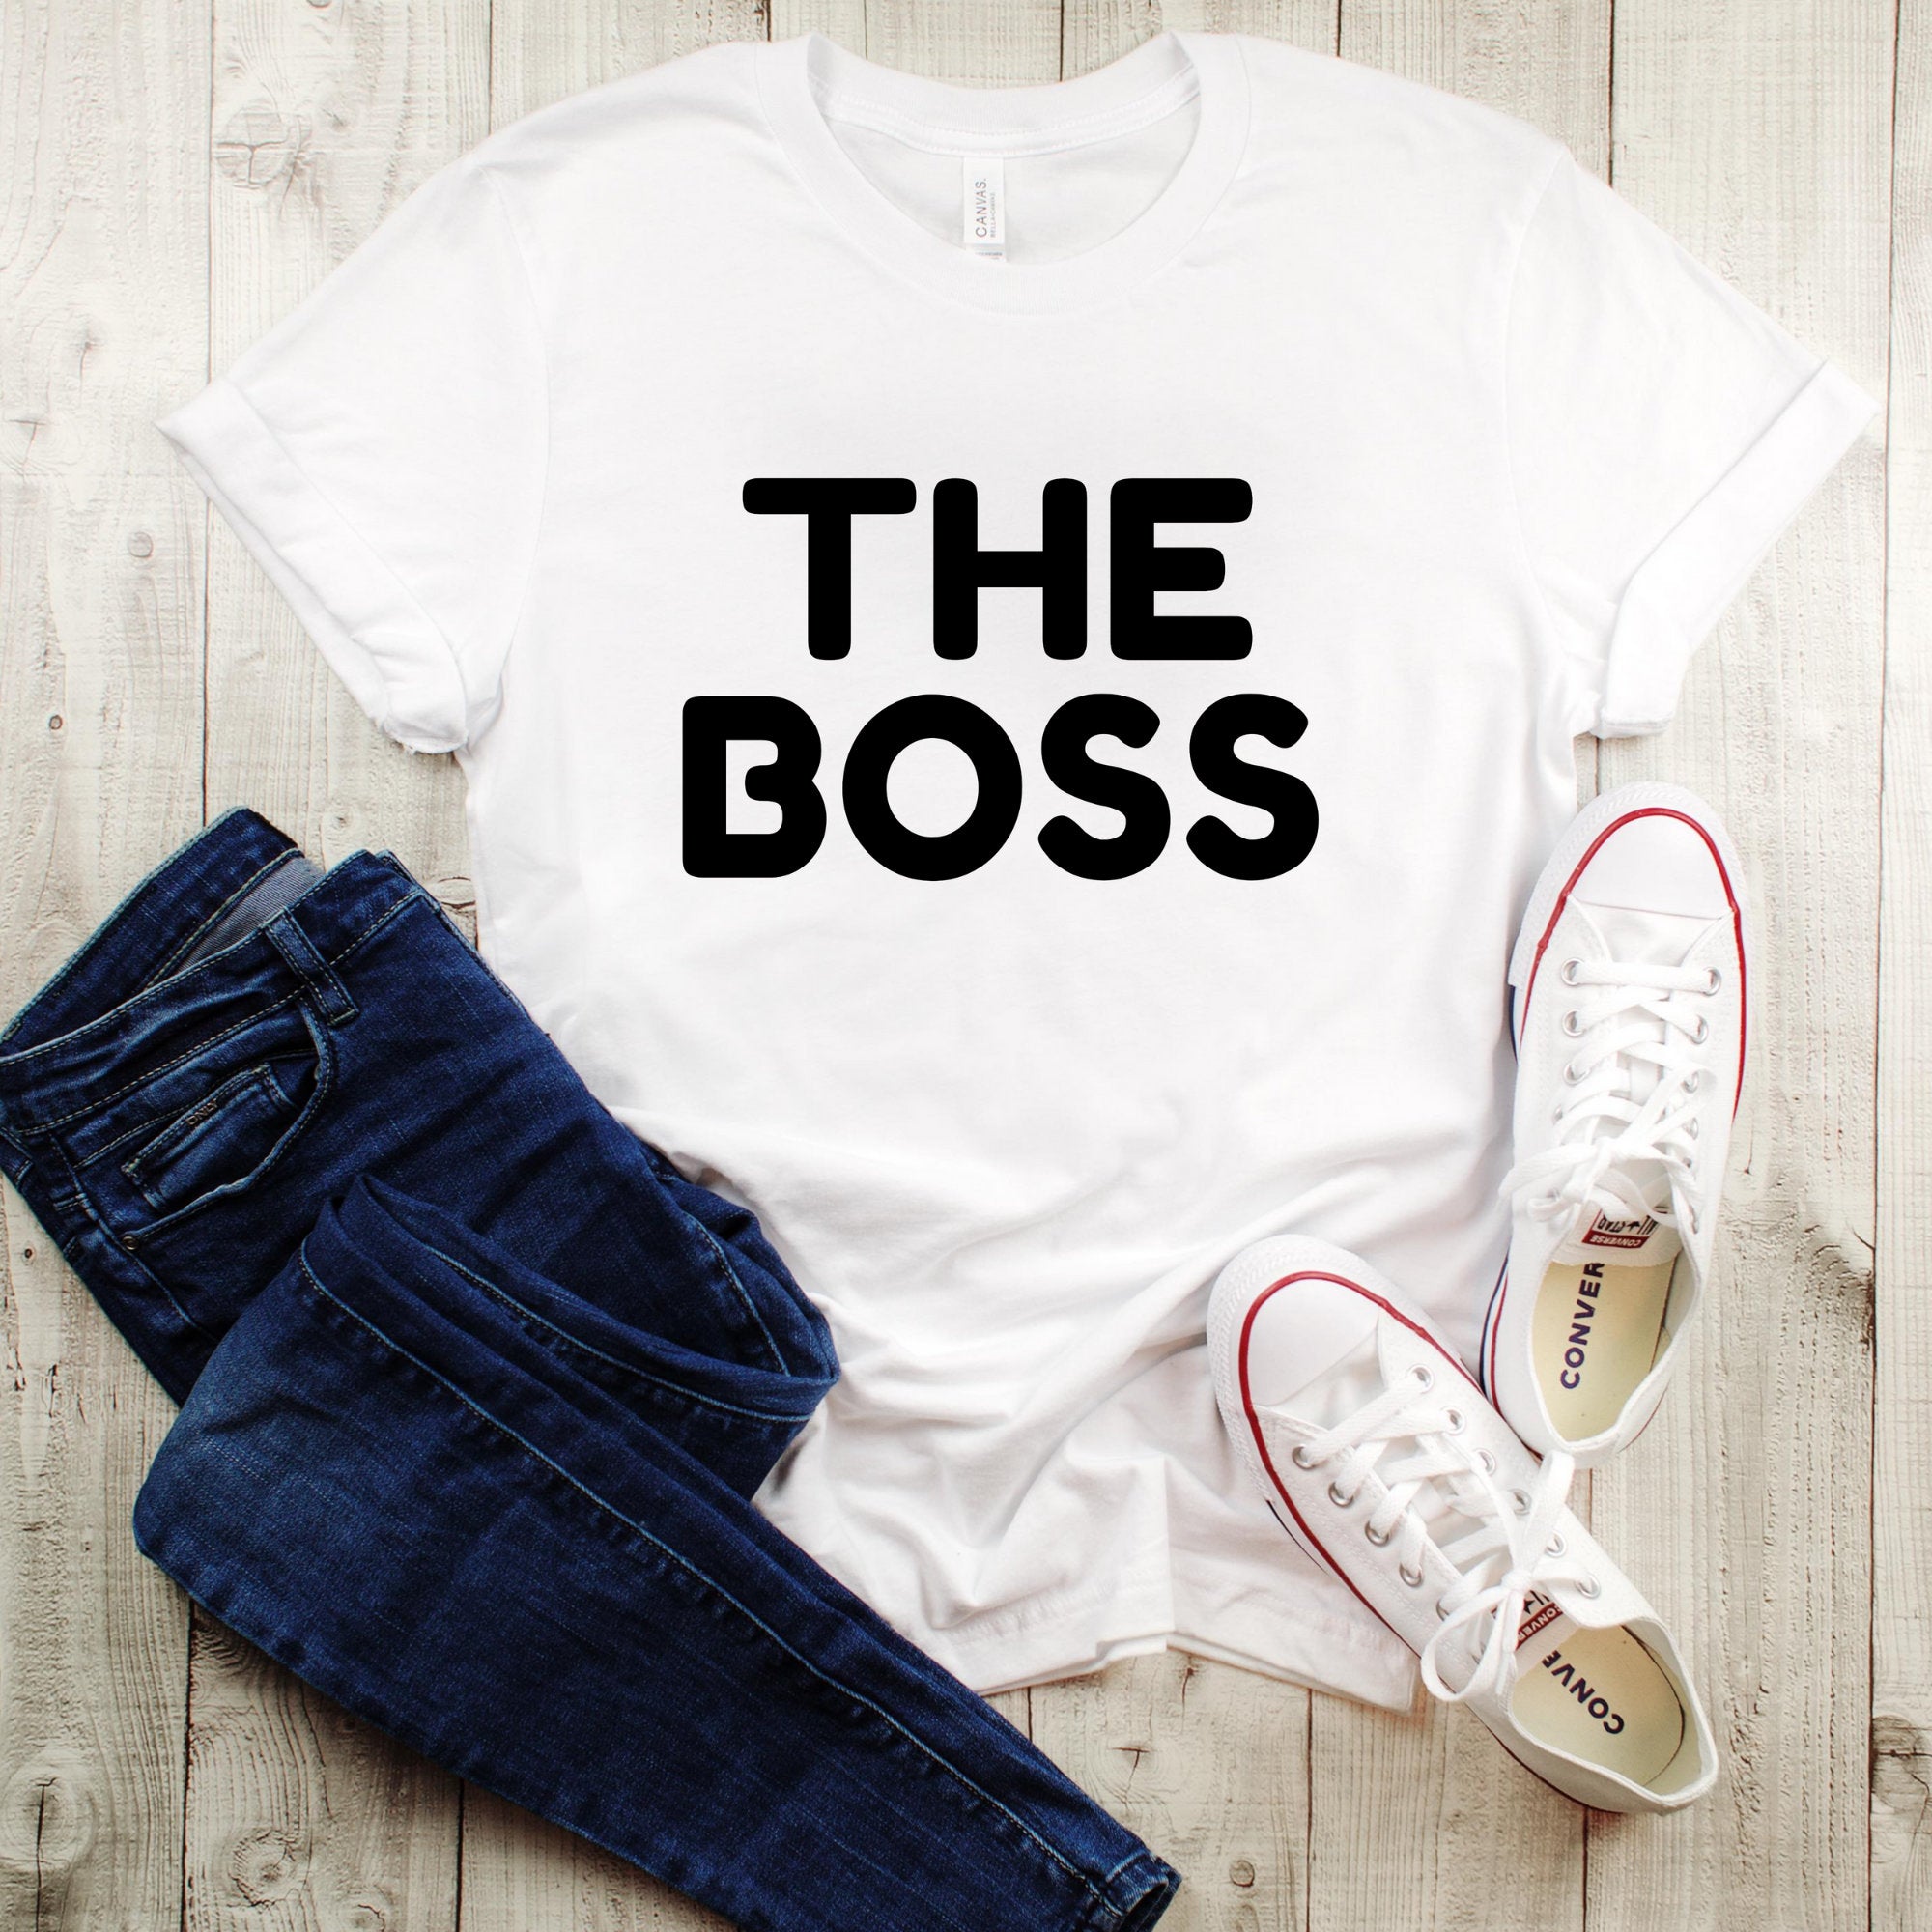 The Boss - The Real Boss Matching Couples Shirts, Mens Tee and Womens Tee,Gift for Her,Gift for Him, Matching Tee,Matching Couple Shirts - MamaBuzz Creations